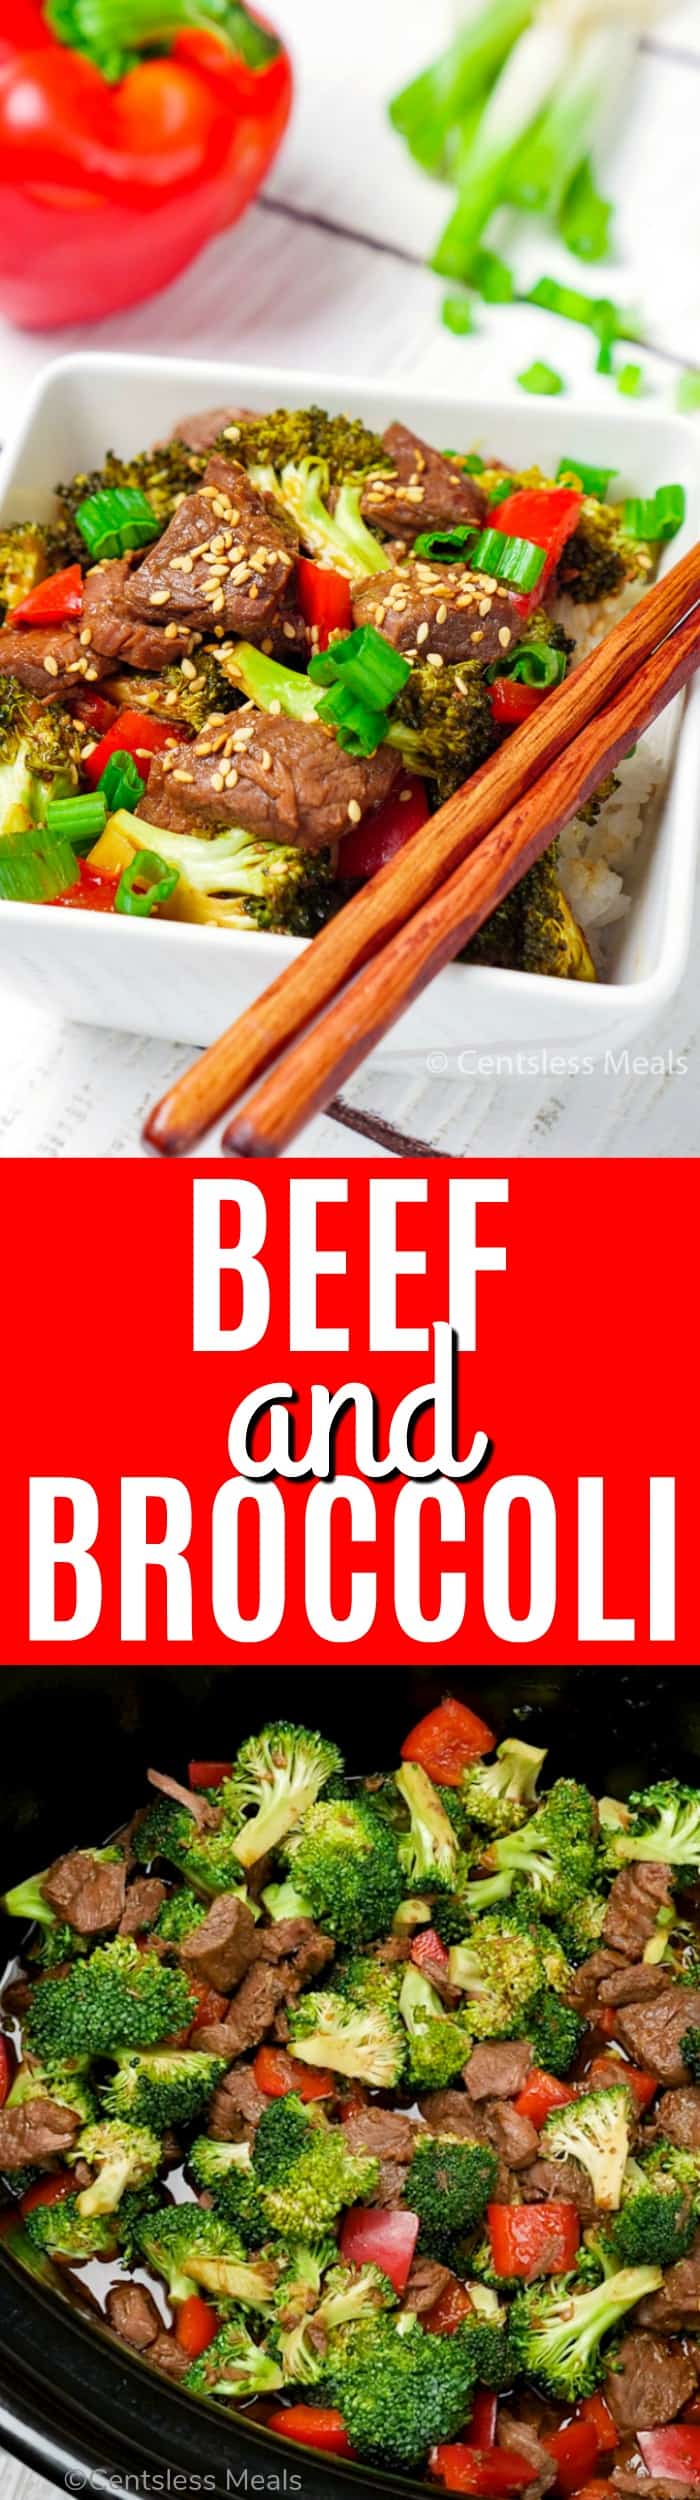 Beef and broccoli in a slow cooker and in a white bowl with a title